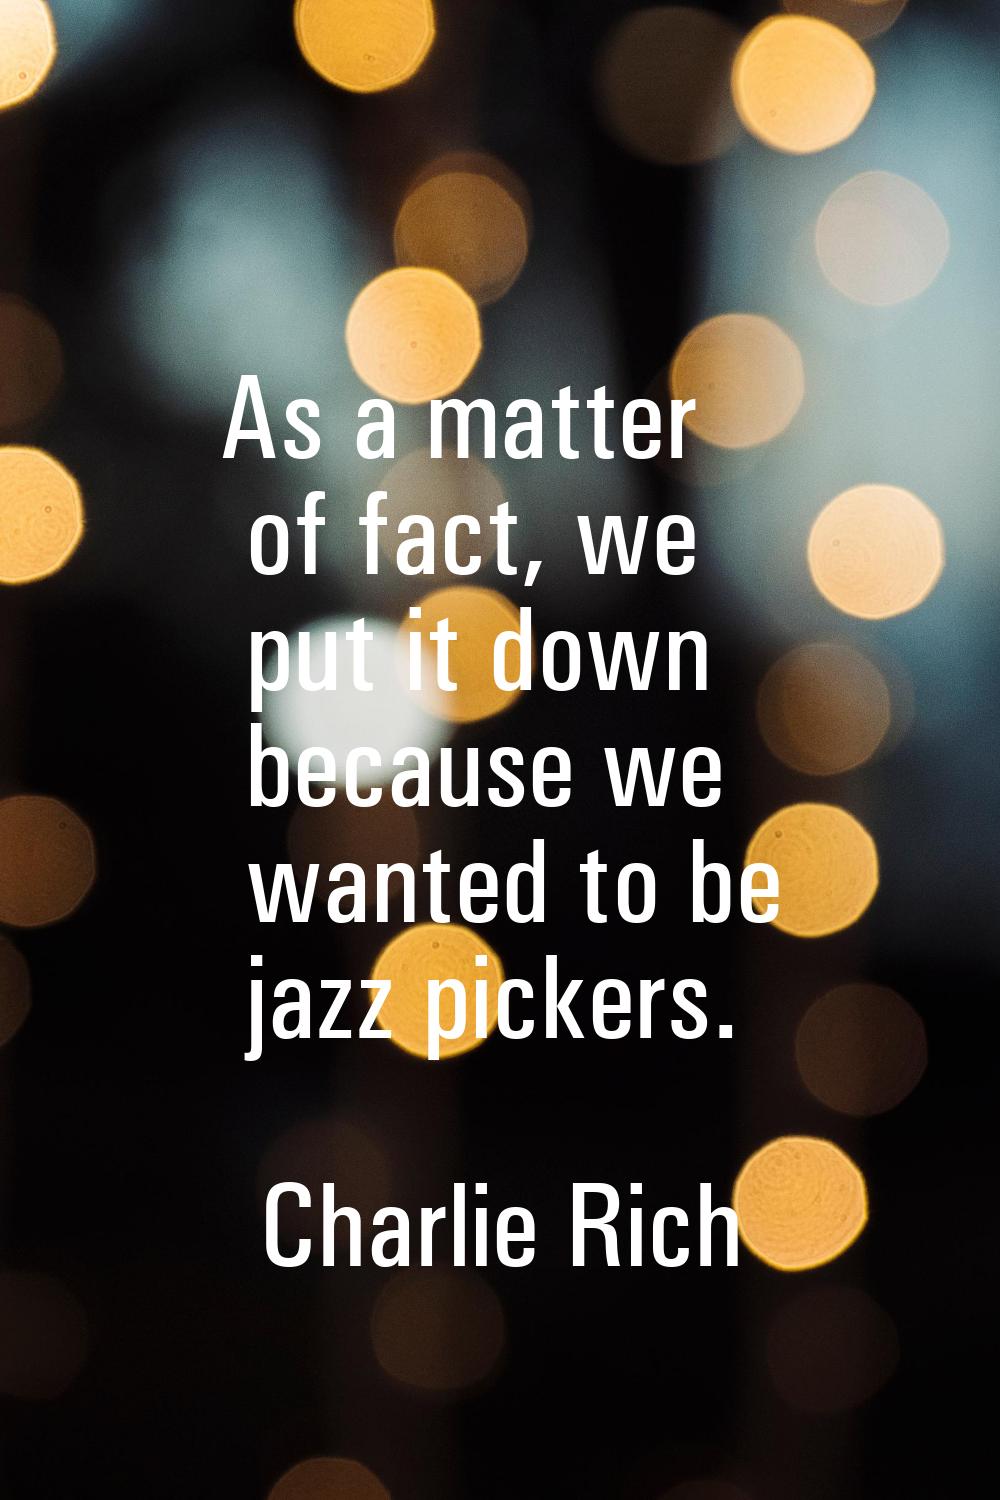 As a matter of fact, we put it down because we wanted to be jazz pickers.